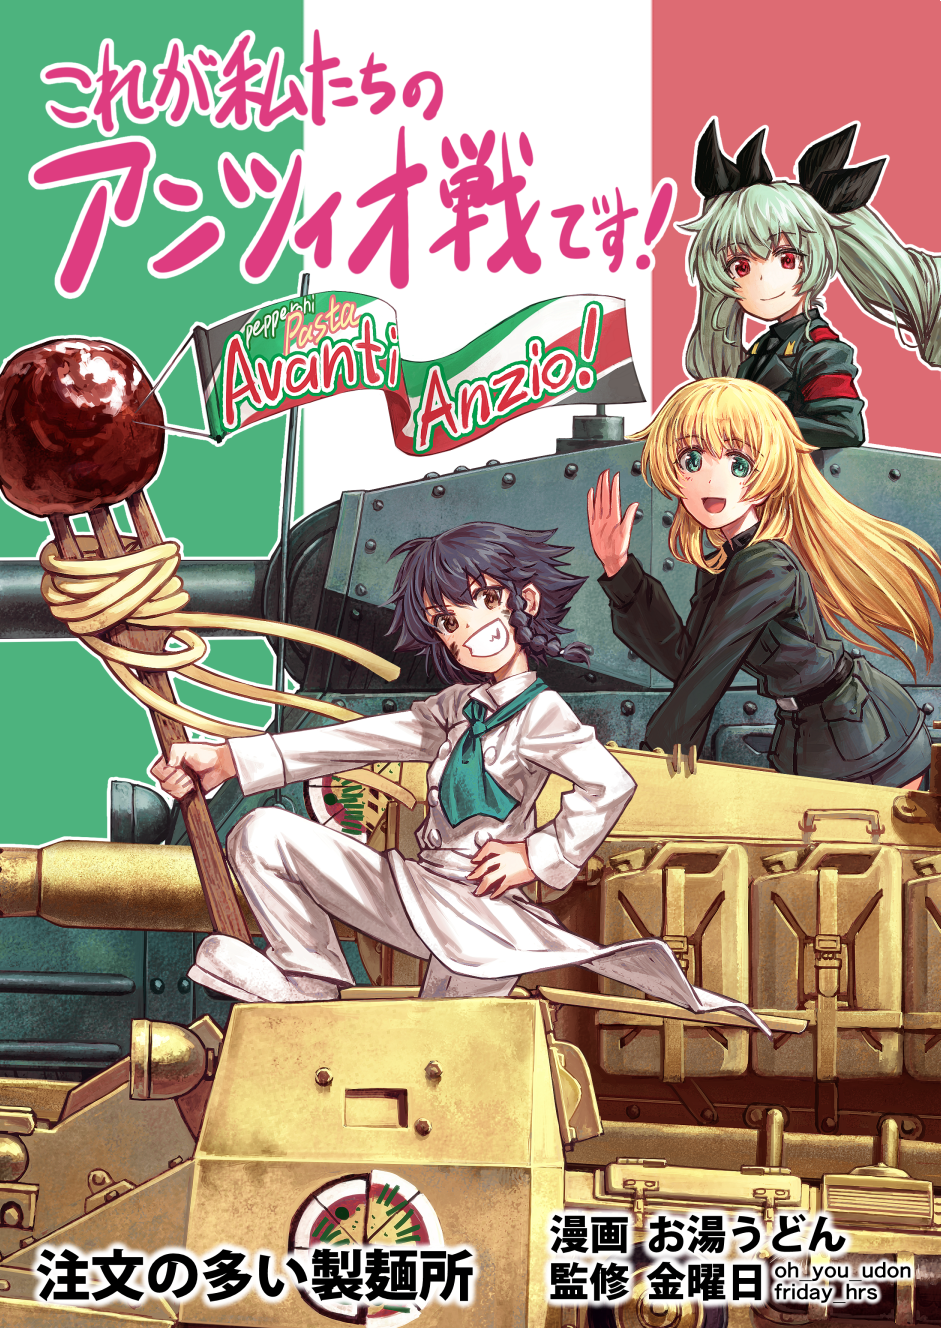 3girls anchovy blonde_hair brown_eyes carpaccio carro_armato_p40 carro_veloce_cv-33 chef_uniform cover cover_page flag food fork girls_und_panzer green_eyes green_hair ground_vehicle hair_ribbon highres lain meatball military military_uniform military_vehicle motor_vehicle multiple_girls oversized_object pasta pepperoni_(girls_und_panzer) red_eyes ribbon semovente_75/18 silver_hair tank twintails uniform